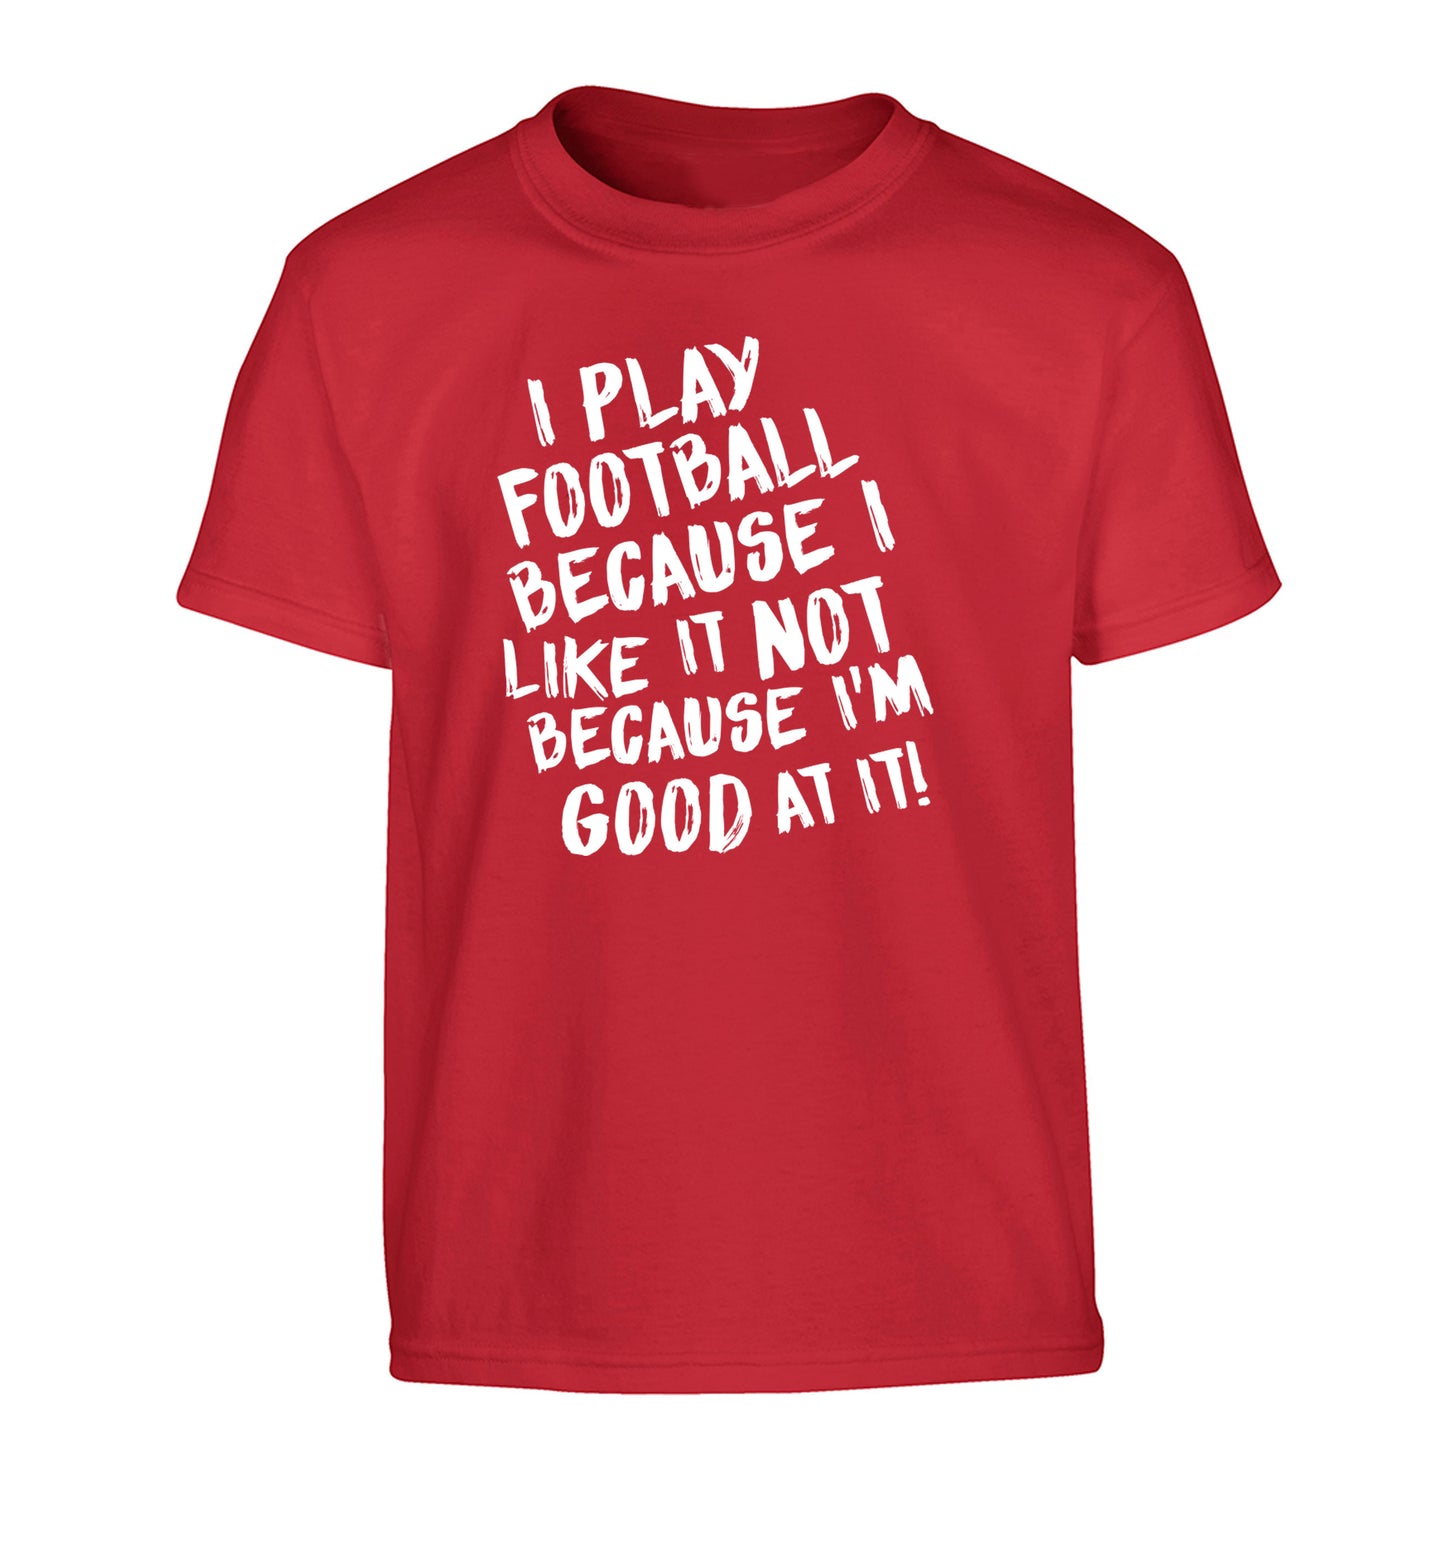 I play football because I like it not because I'm good at it Children's red Tshirt 12-14 Years